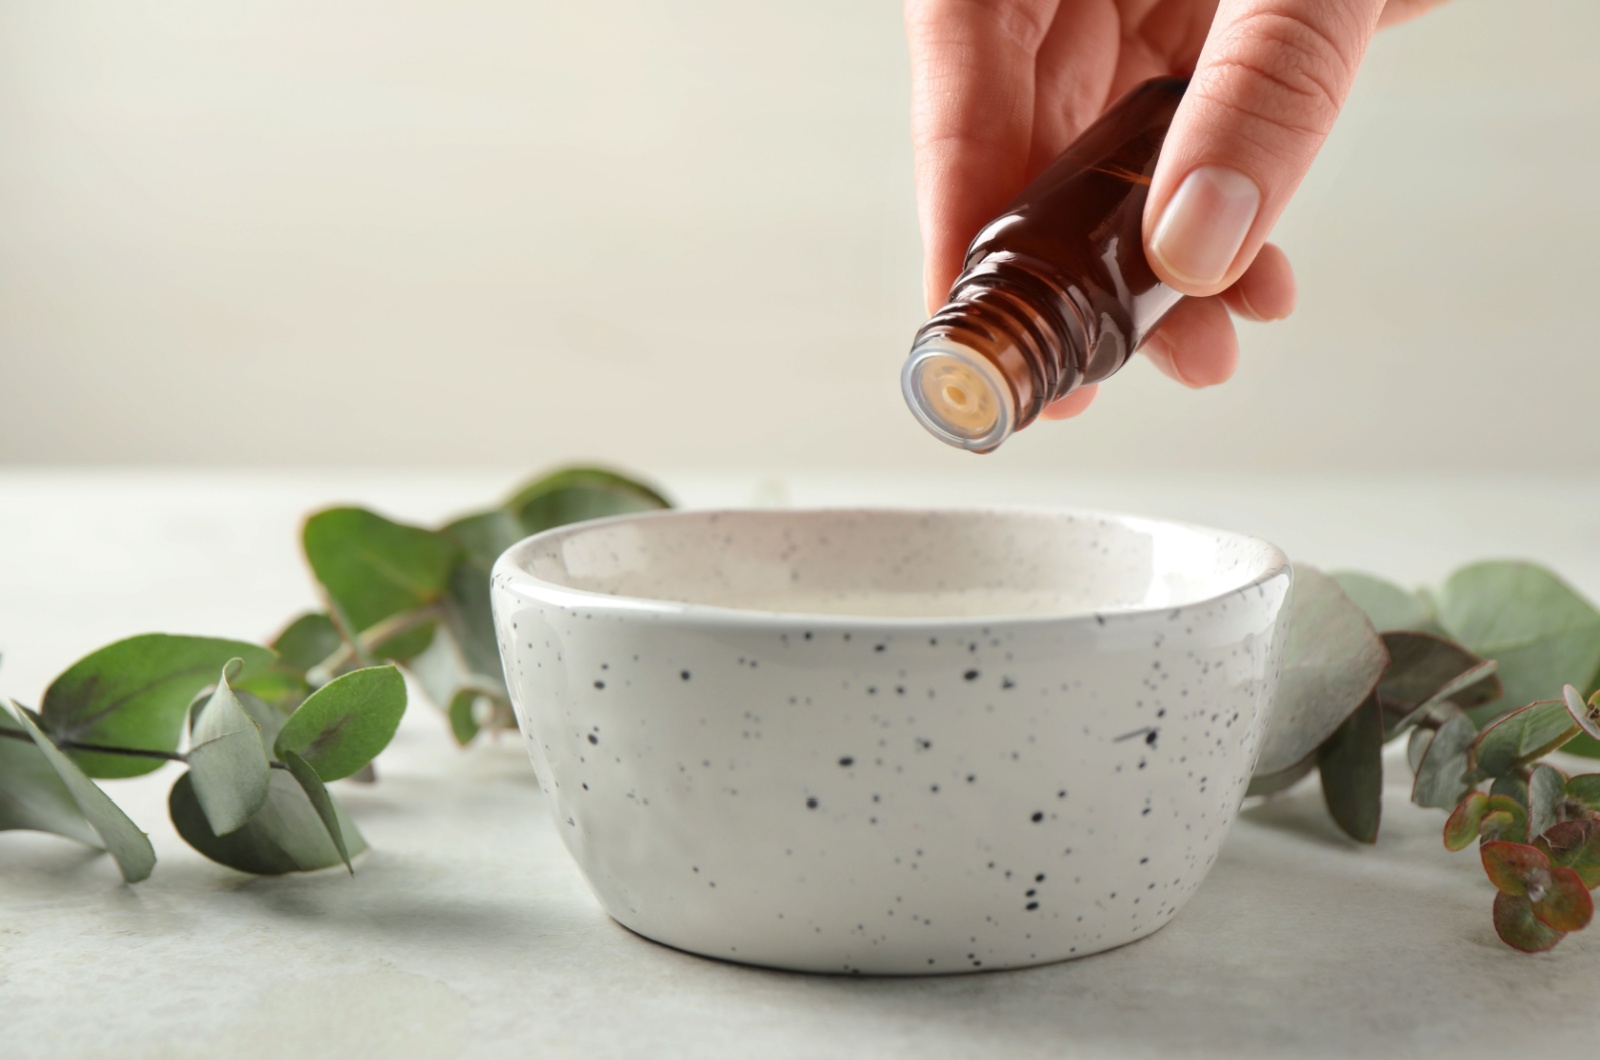 Woman dripping eucalyptus essential oil from bottle into bowl